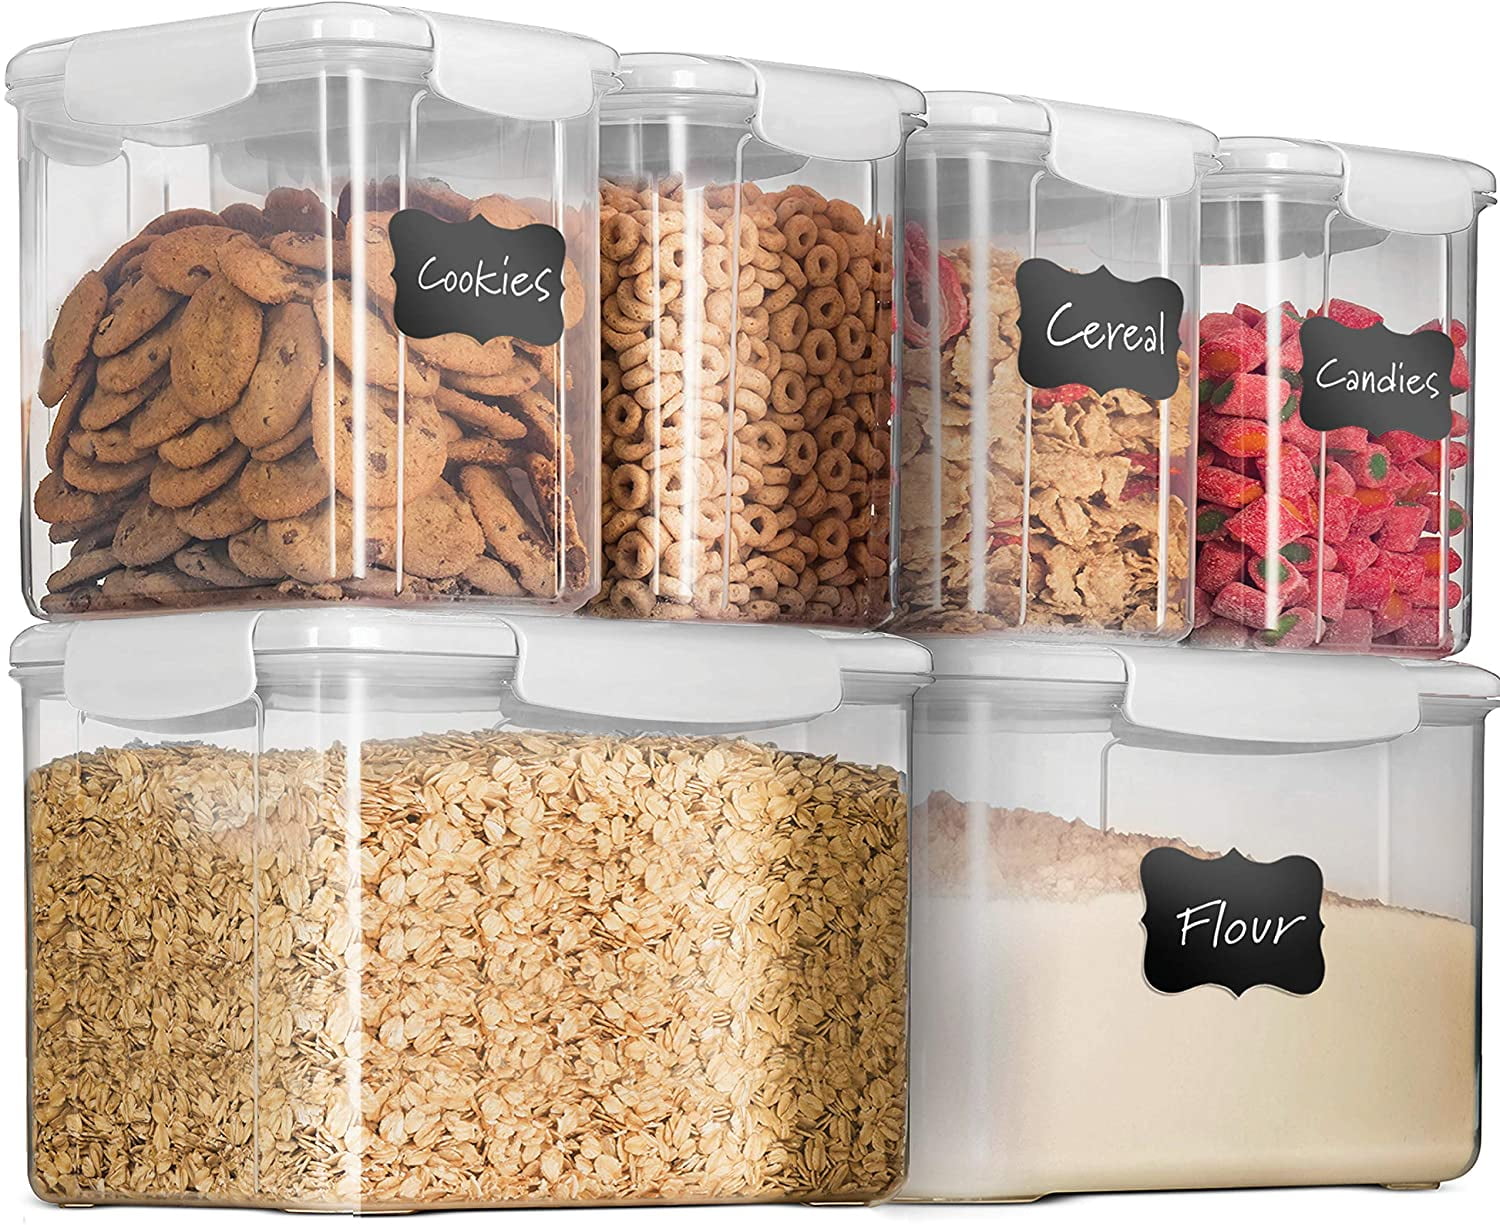 FineDine 12-Piece Airtight Food-Storage Containers with Lids - BPA-Free Plastic Kitchen Pantry Storage Containers - Dry-Food-Storage Containers Set Fo